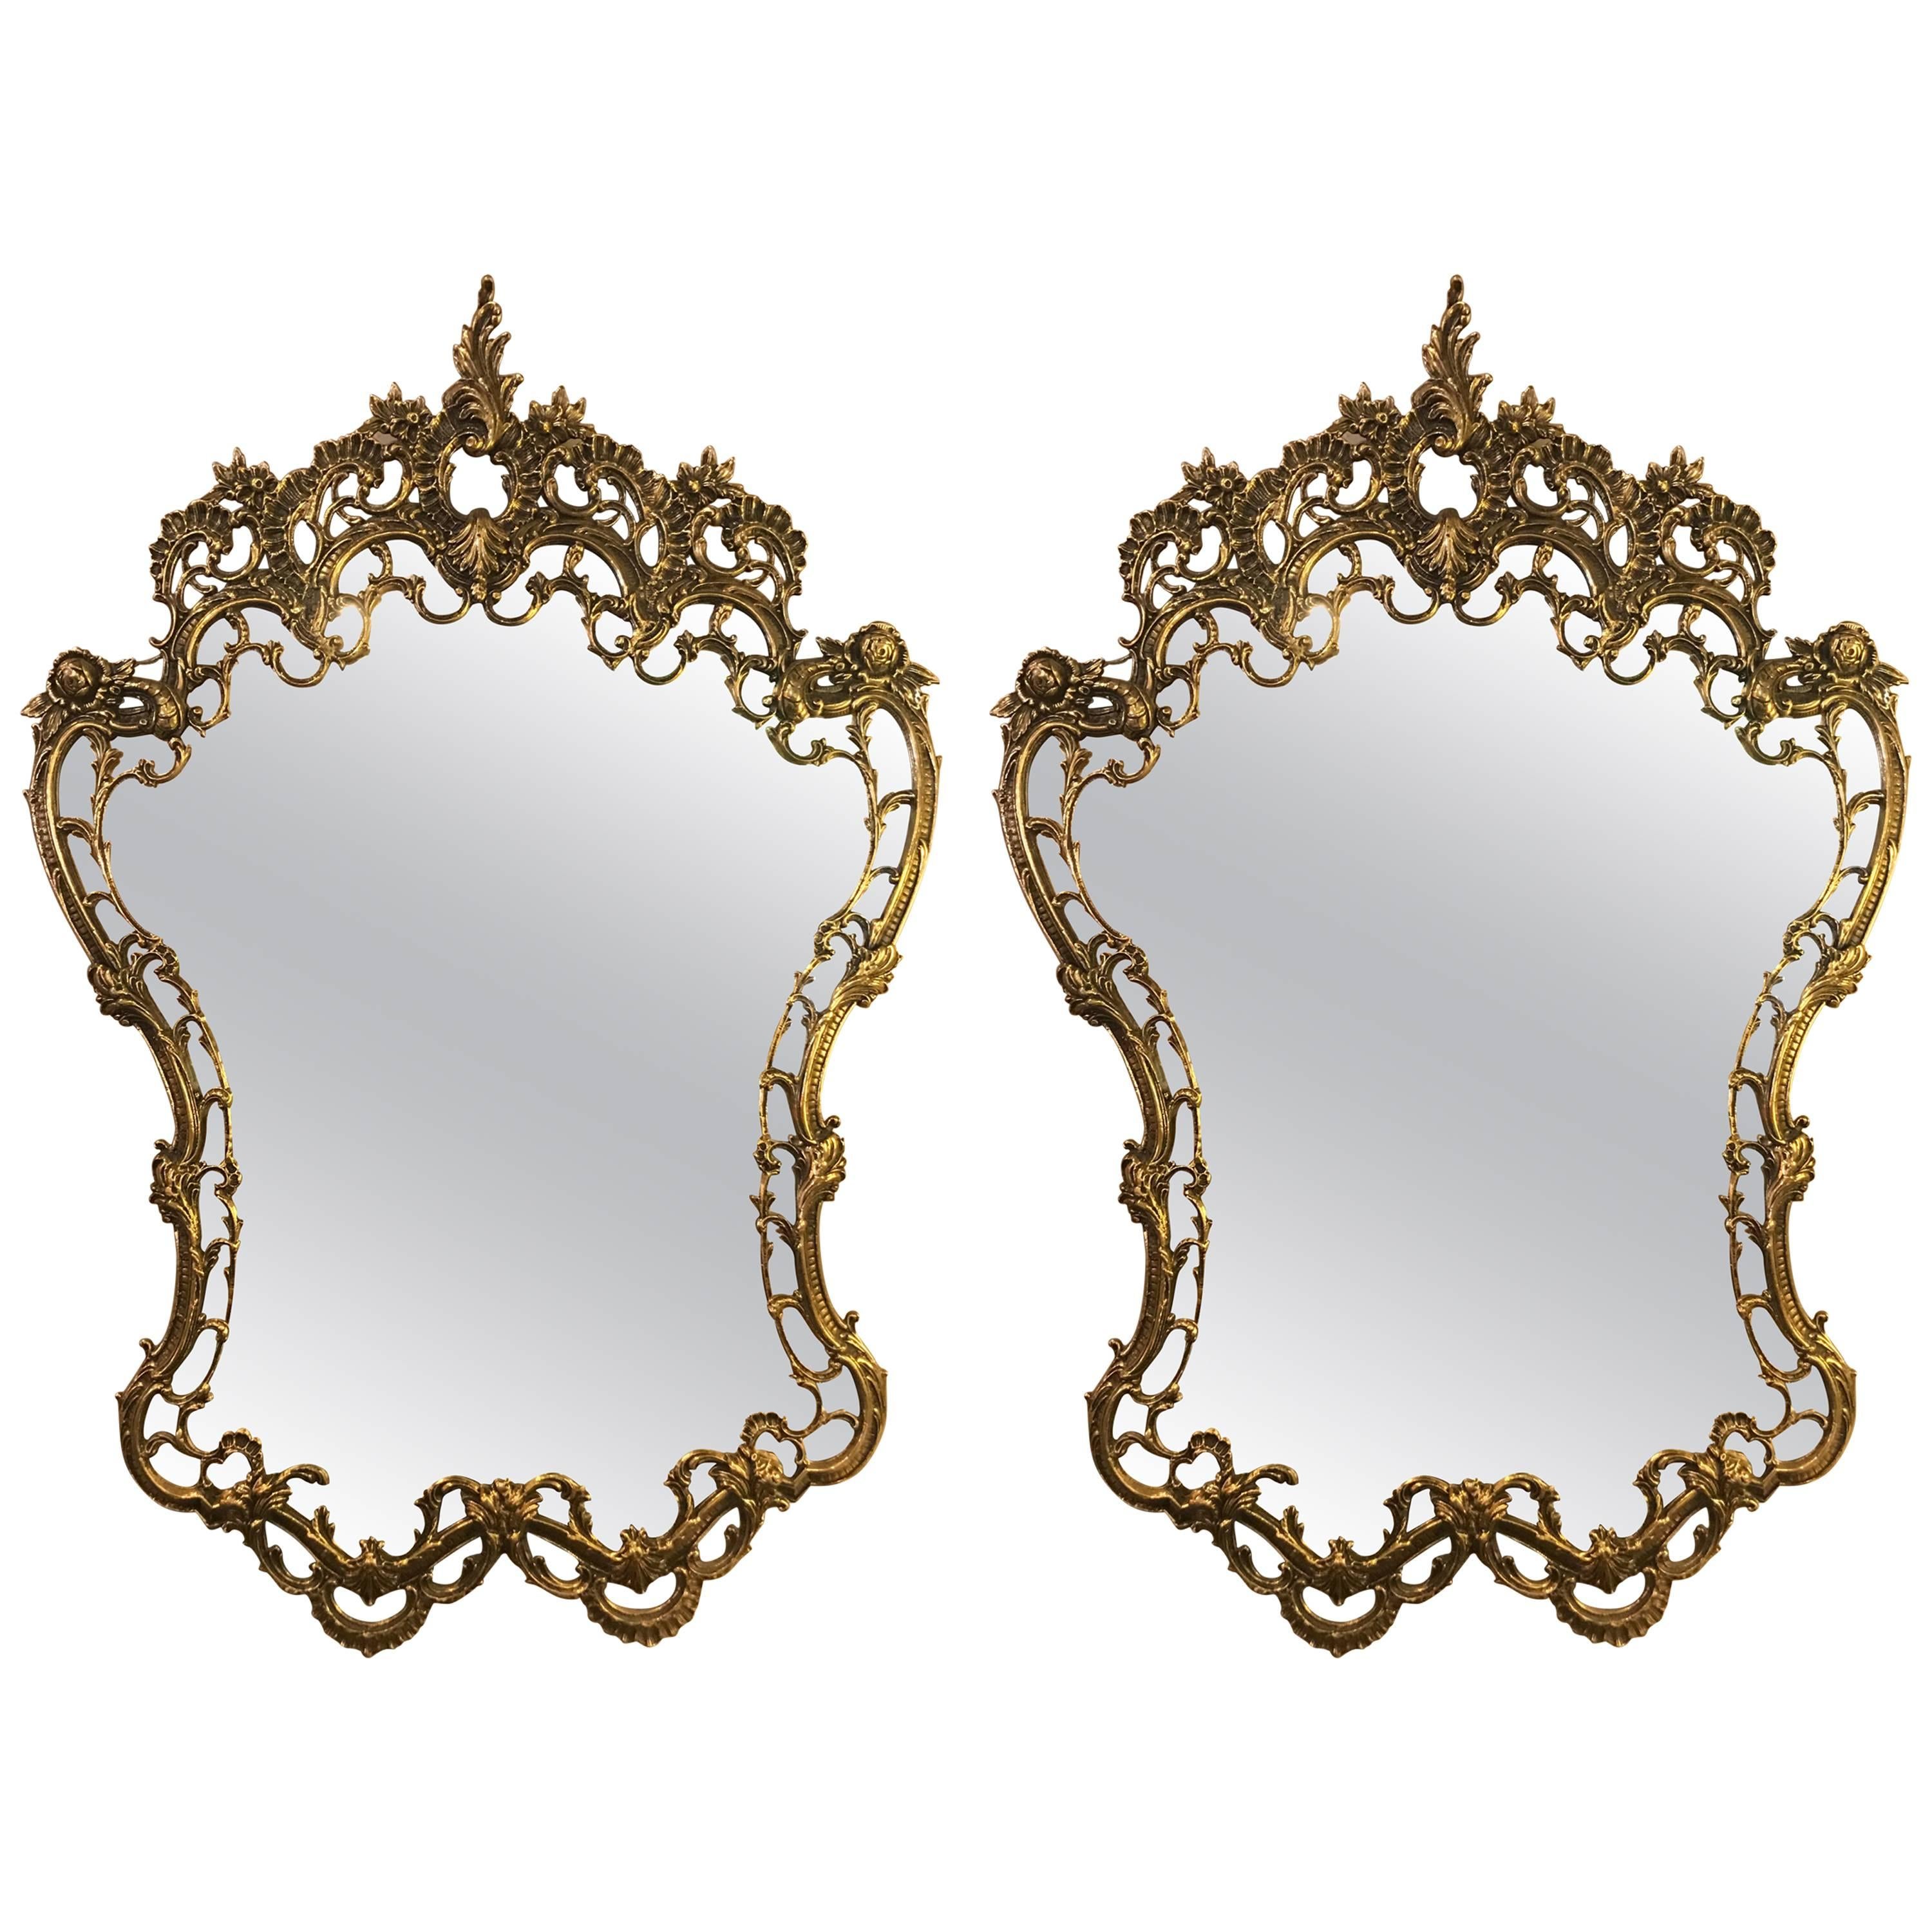 Pair of Ornate Rococo Style Solid Brass Console or Pier Mirrors